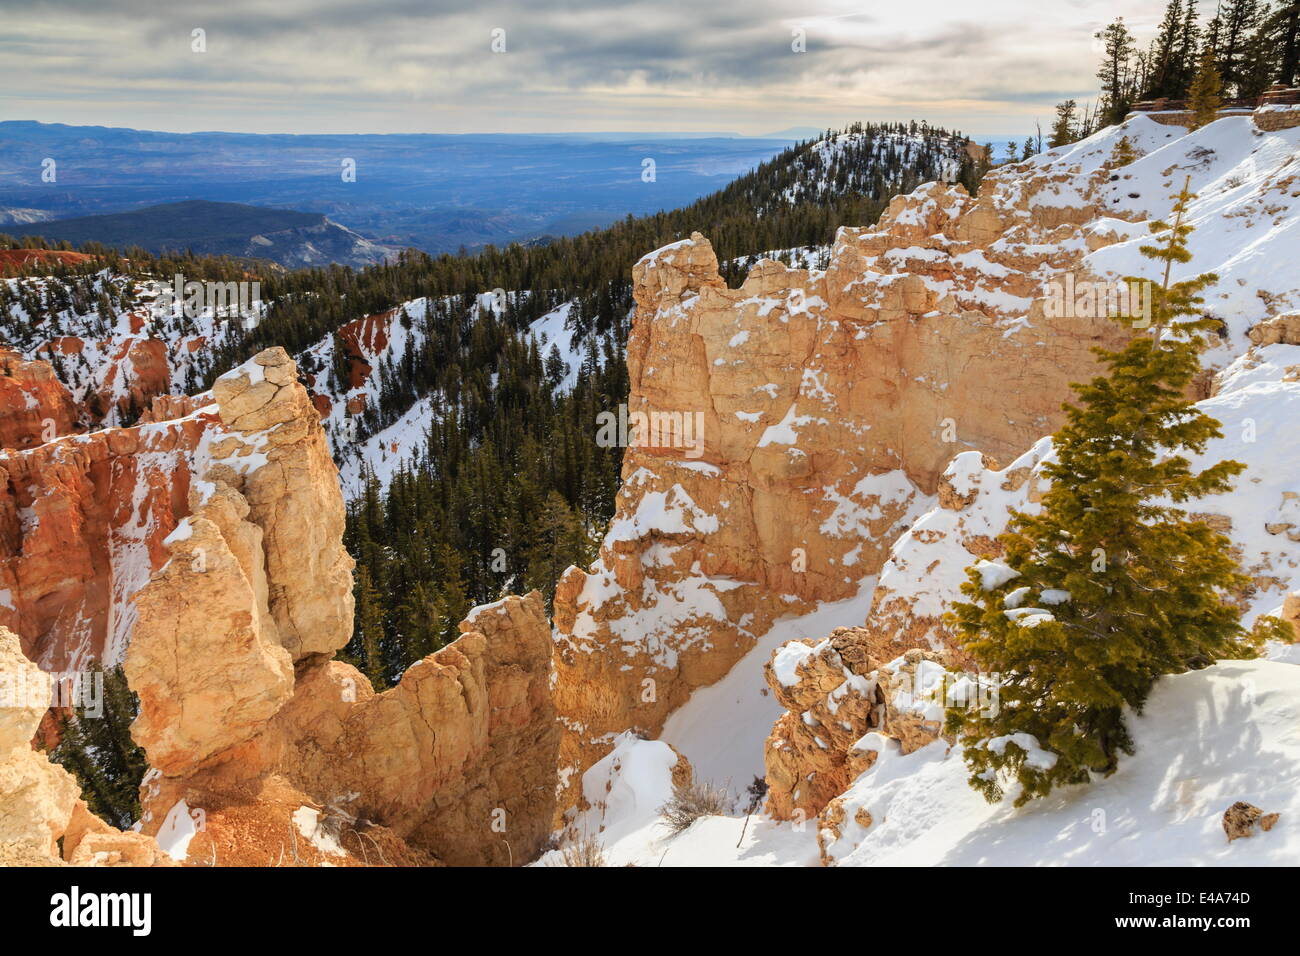 Rim edge, pine trees and snowy cliffs lit by morning sun with cloudy sky, Rainbow Point, Bryce Canyon National Park, Utah, USA Stock Photo